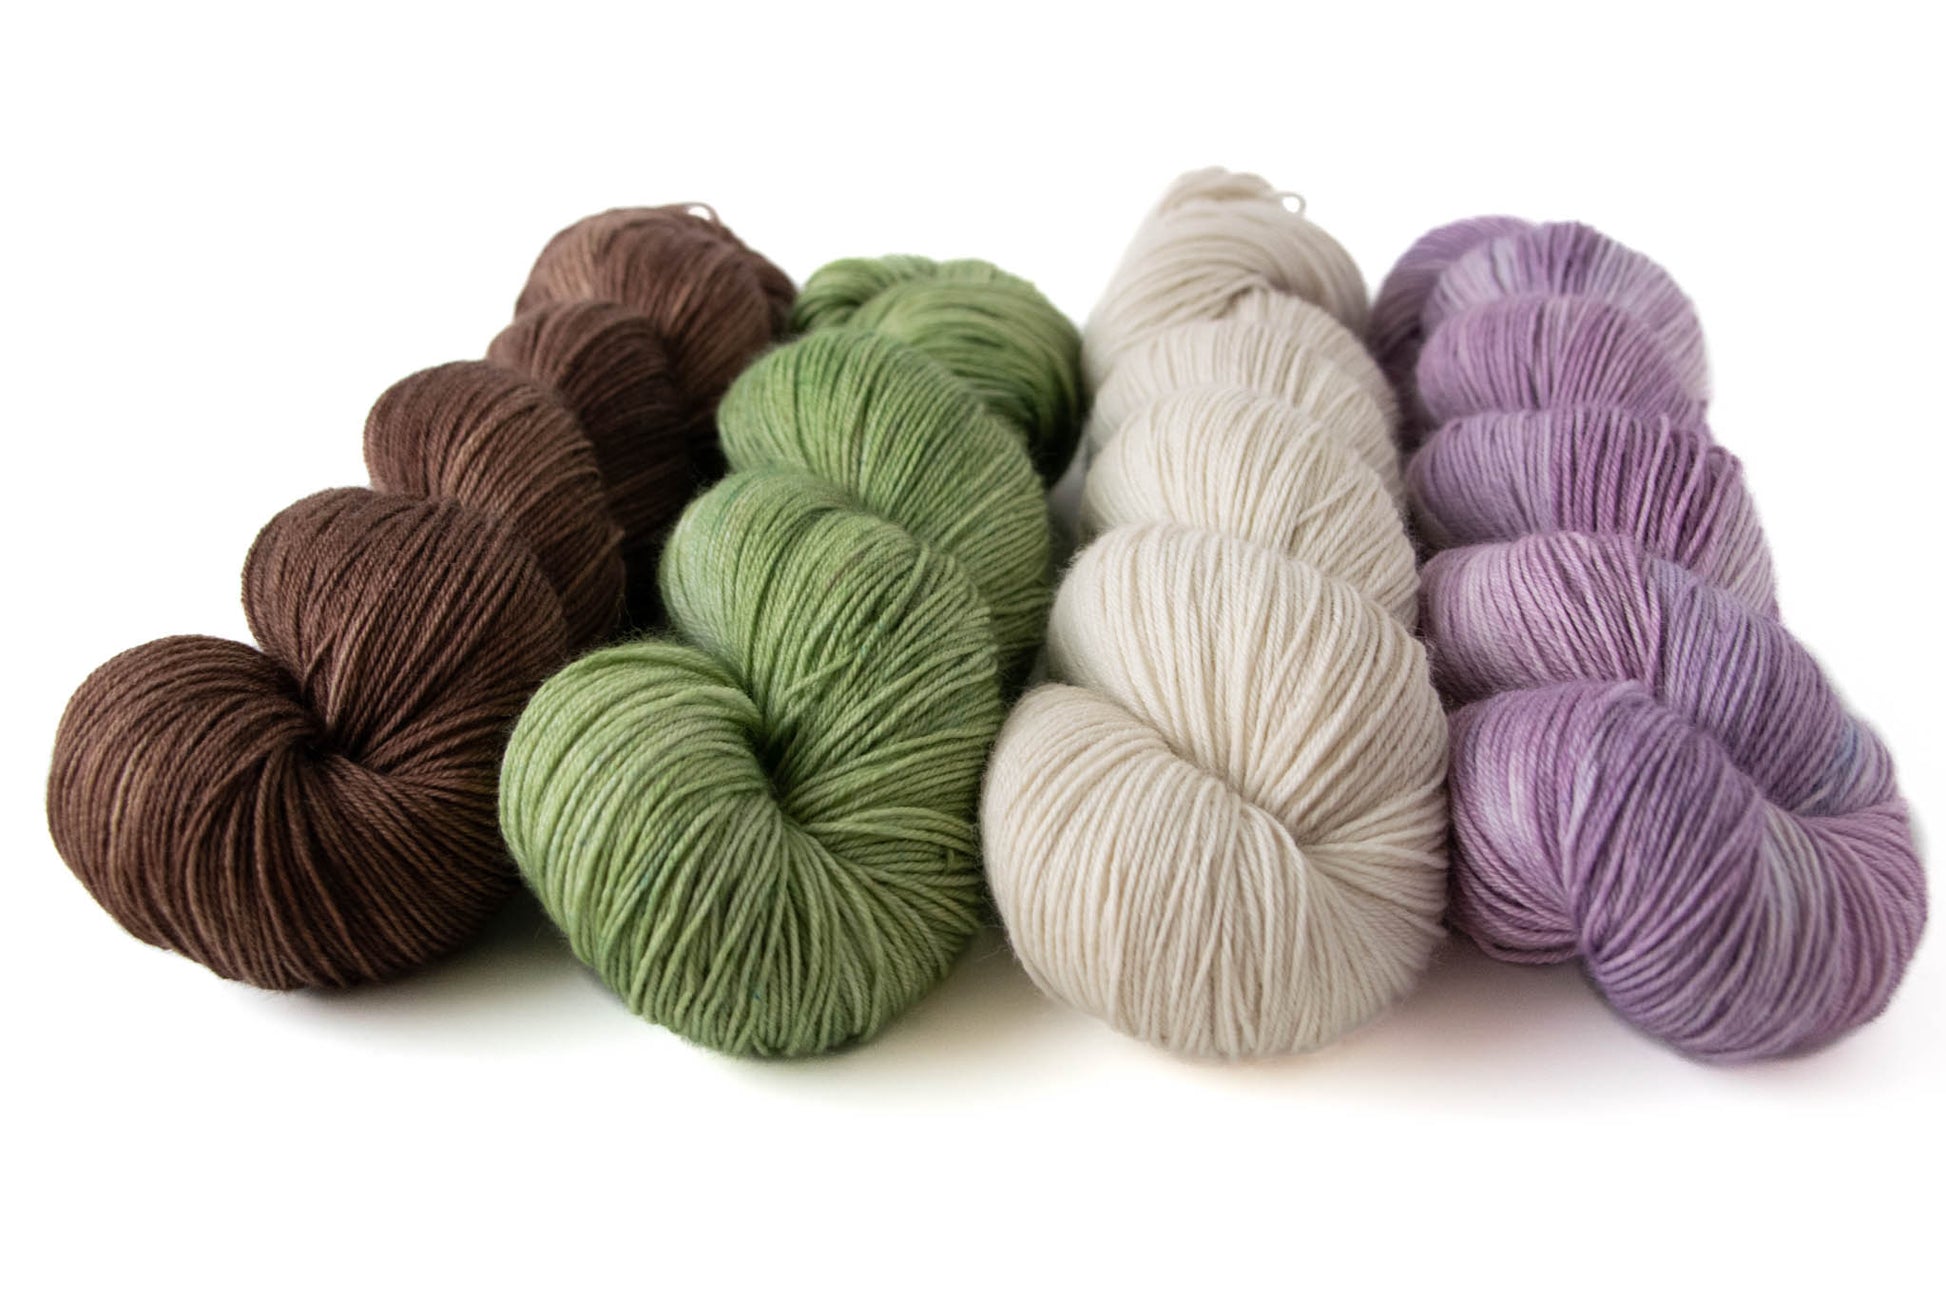 The four tonal colorways in the Murder, She Knit collection: brown, green, cream, and purple.